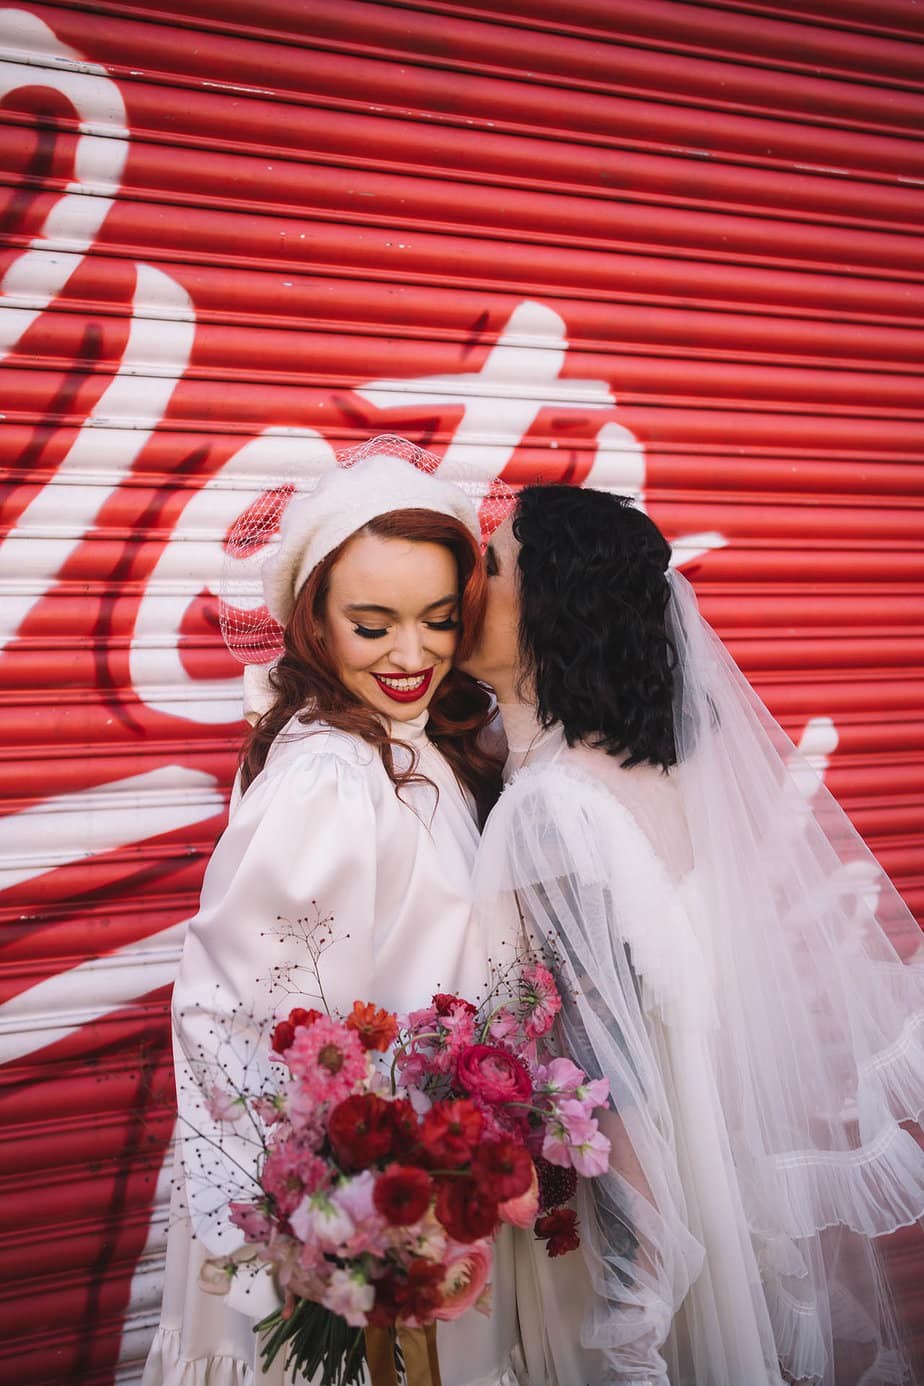 Manchester City centre elopement with two brides. Bride Esme is being kissed by Becca in front of a red graffiti shutter